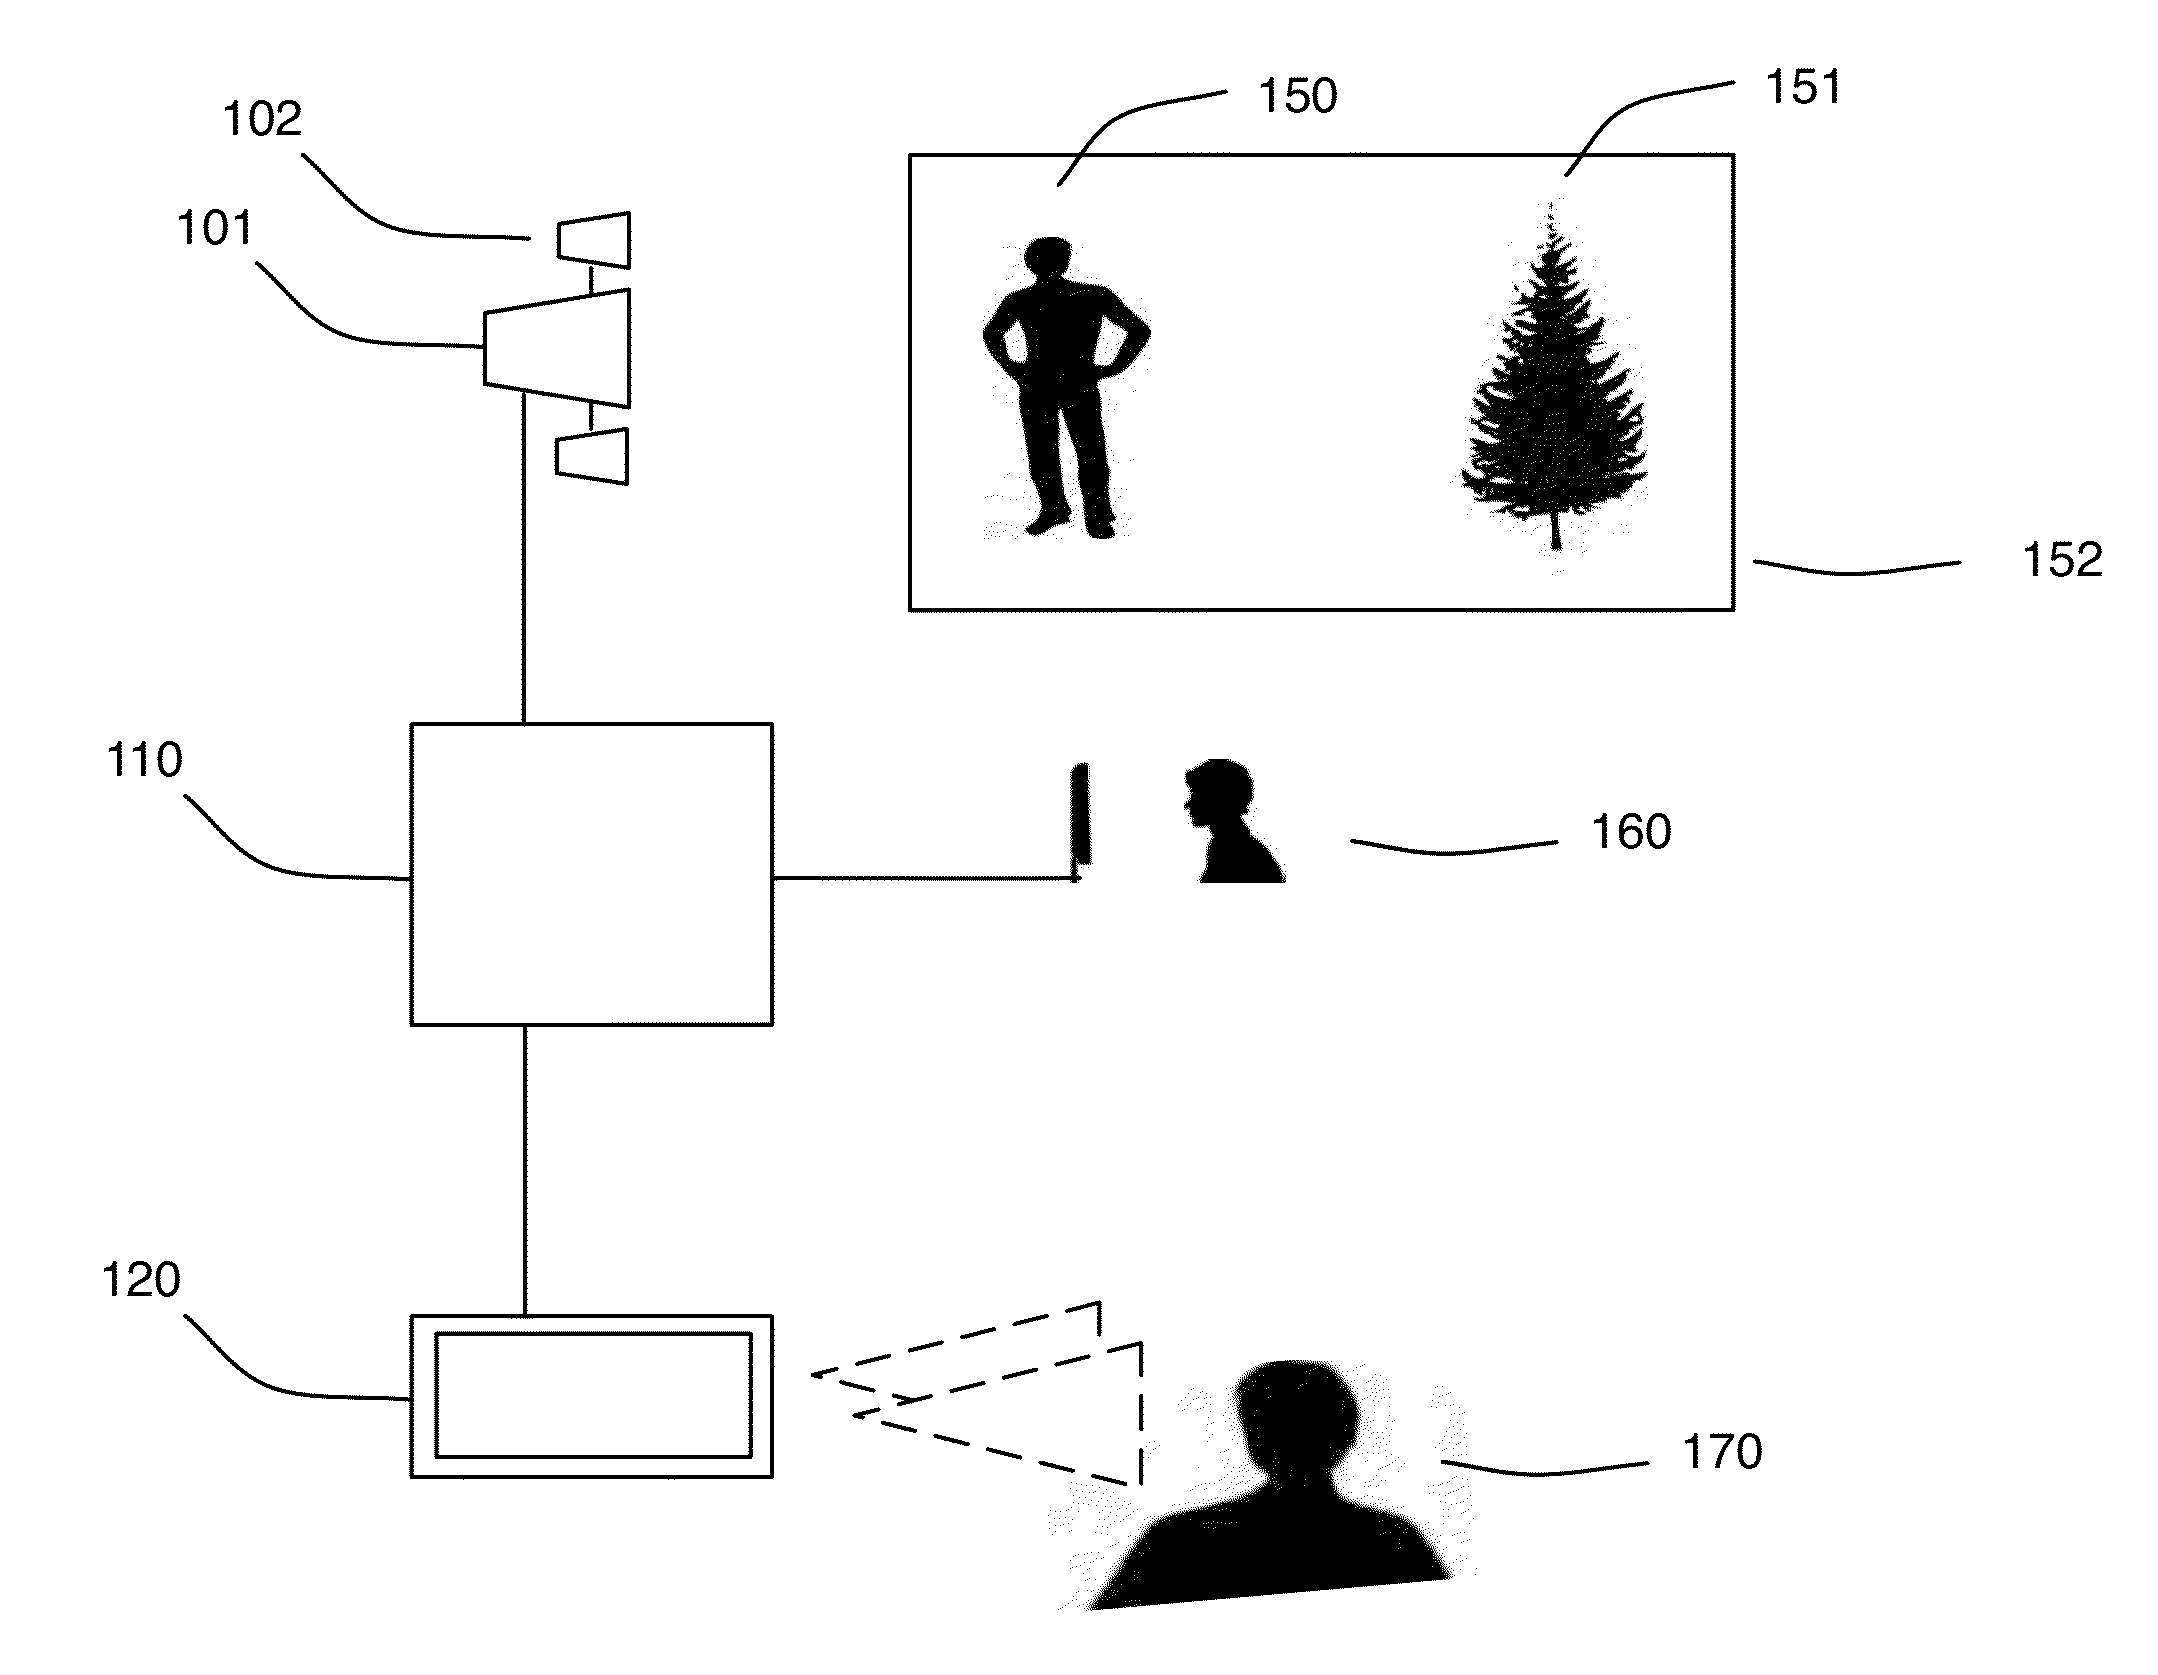 External depth map transformation method for conversion of two-dimensional images to stereoscopic images